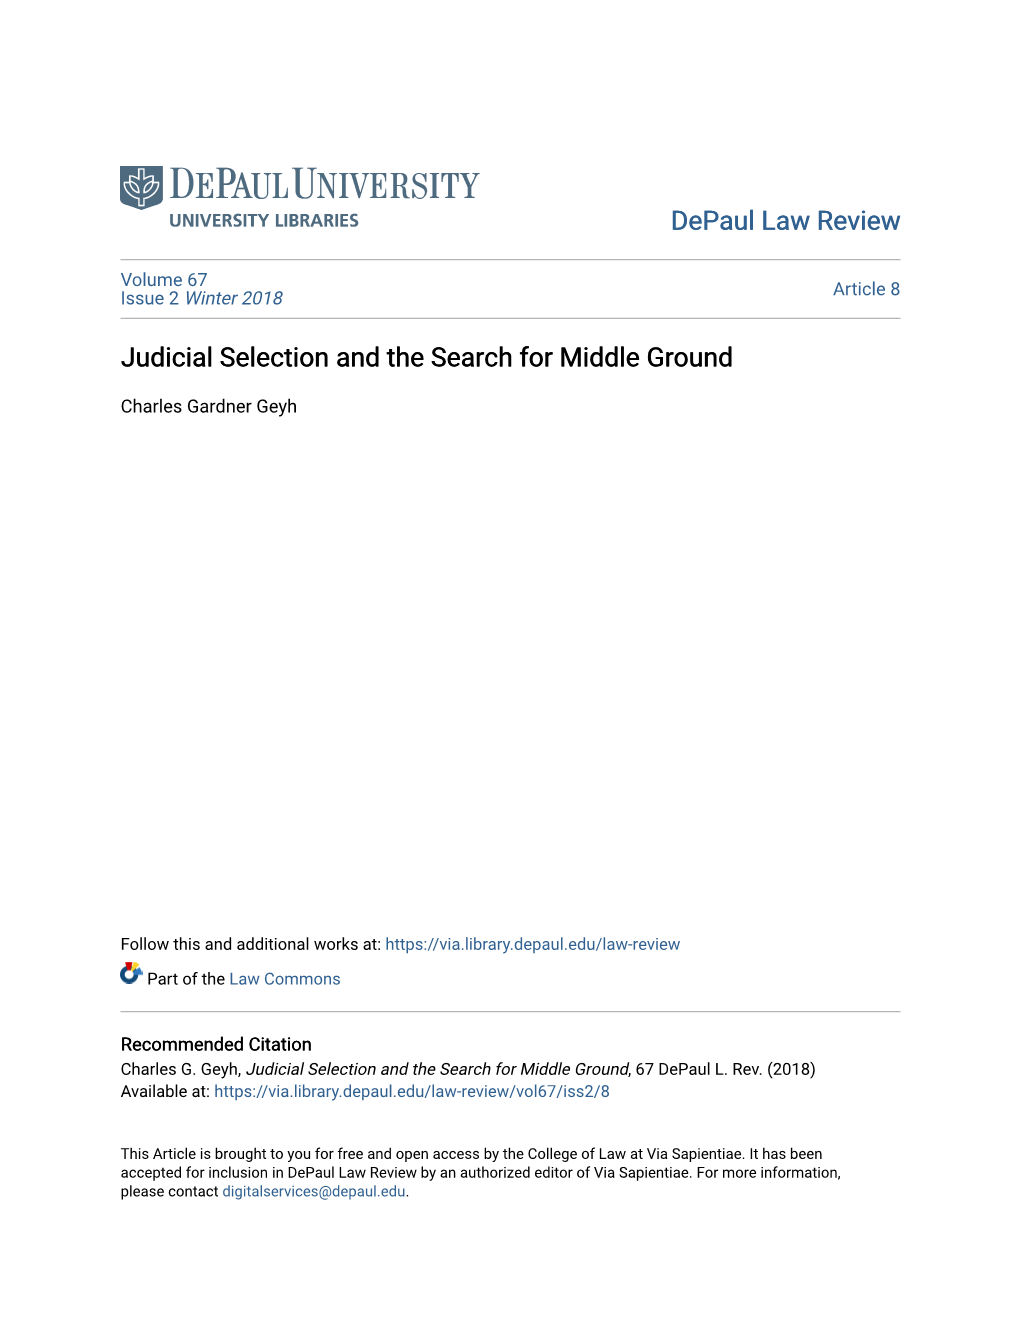 Judicial Selection and the Search for Middle Ground